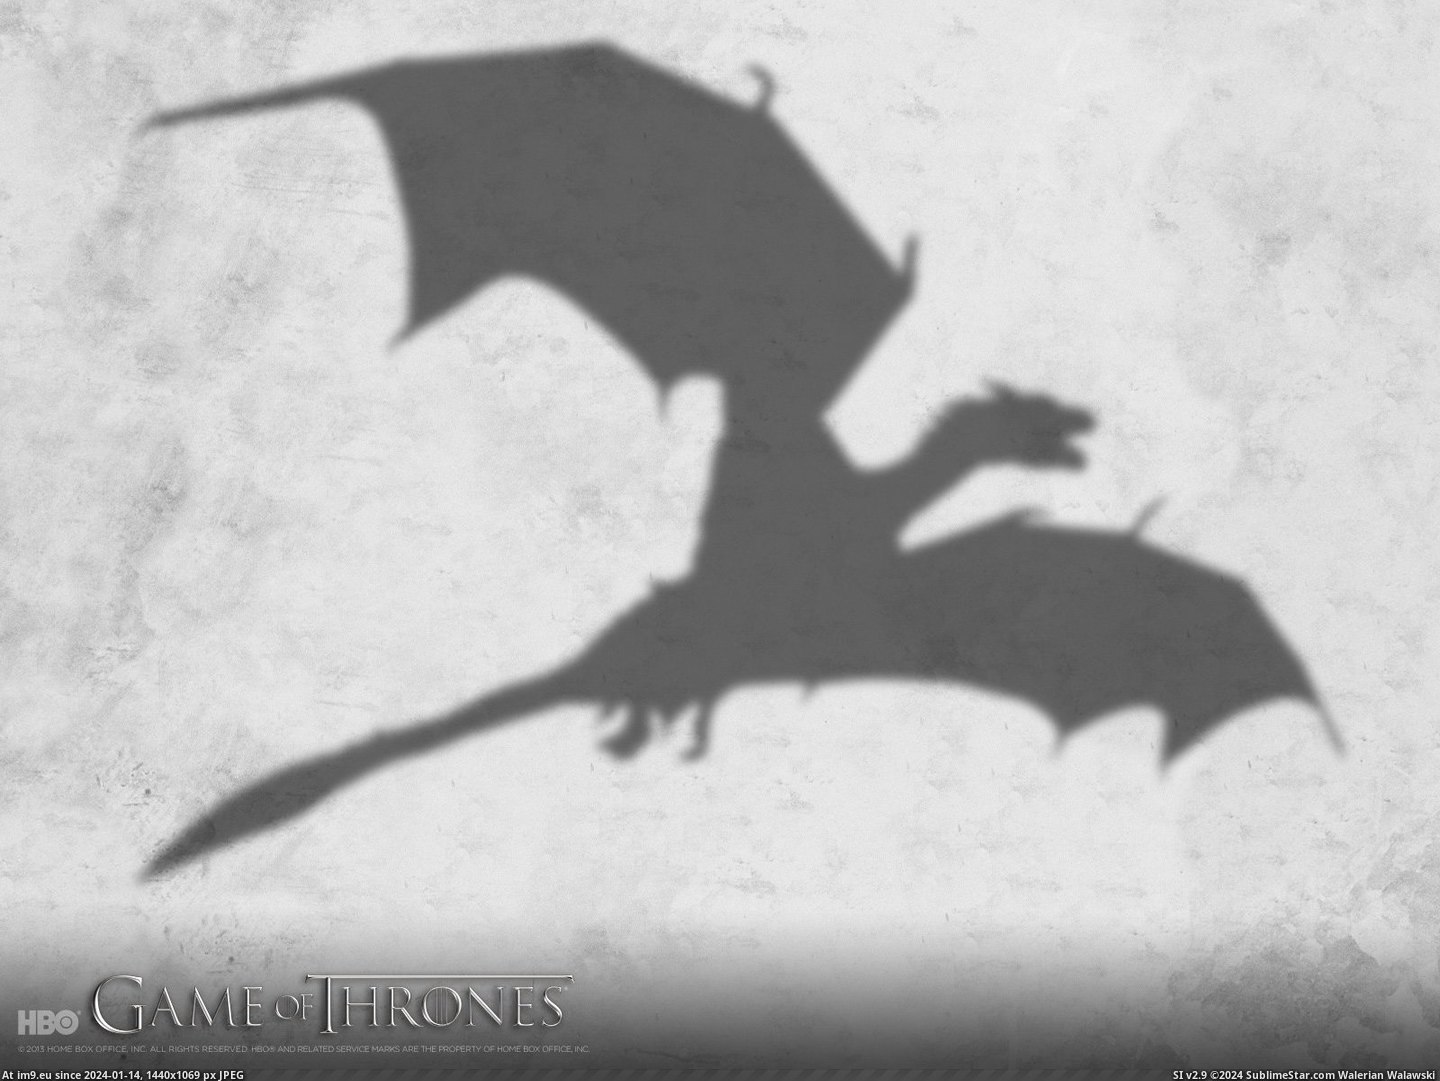 Got S3 Dragon Shadow Wallpaper 1600x1200 (in Game of Thrones 1600x1200 Wallpapers)